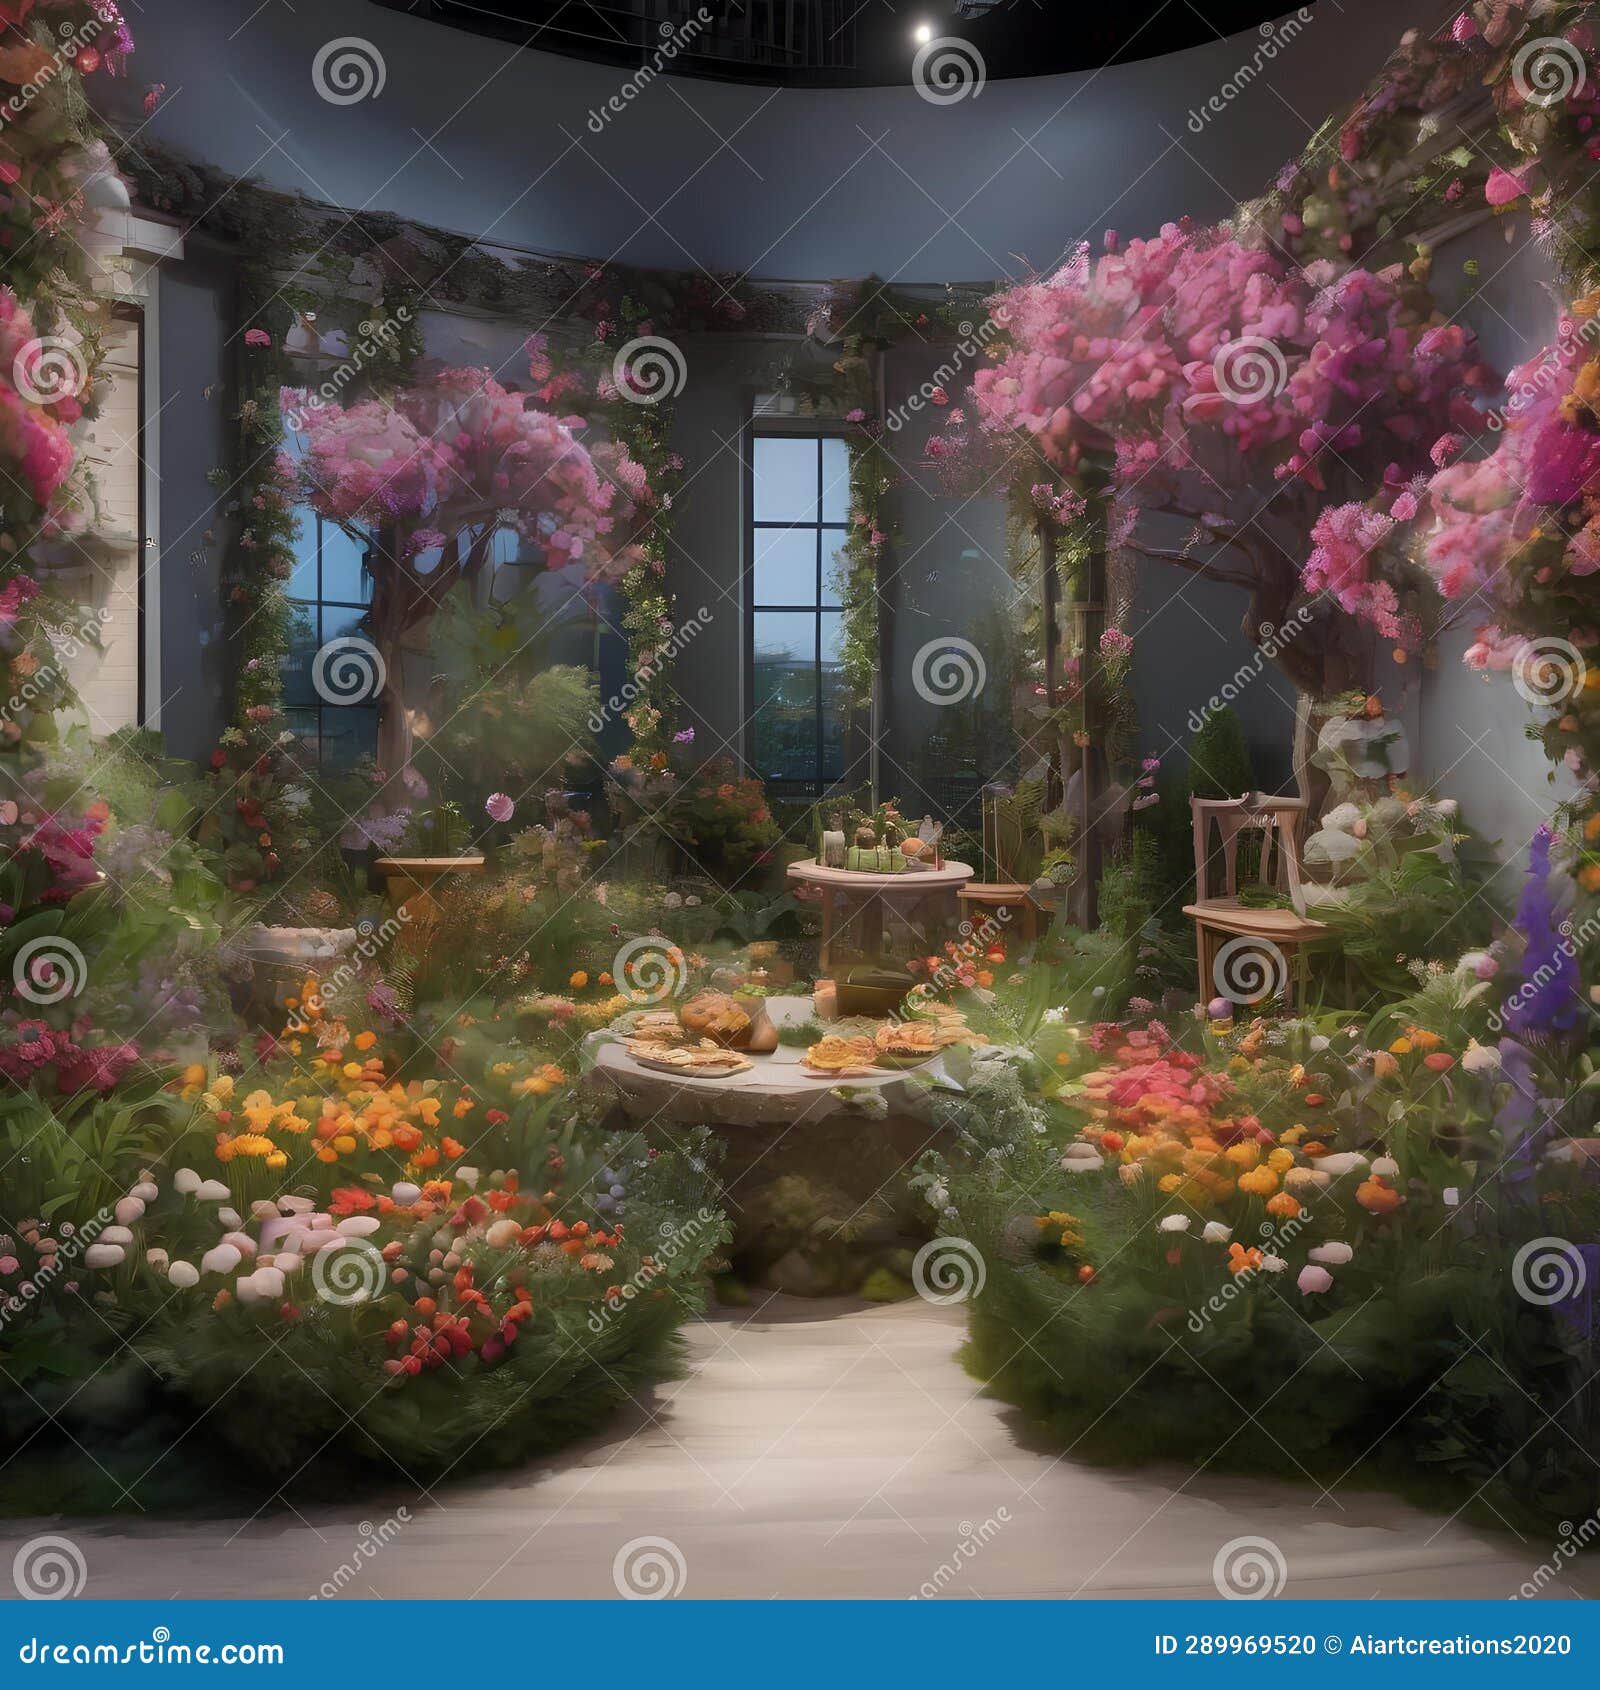 a secret garden with edible flowers and a hidden feast beneath a blooming, candied tree2